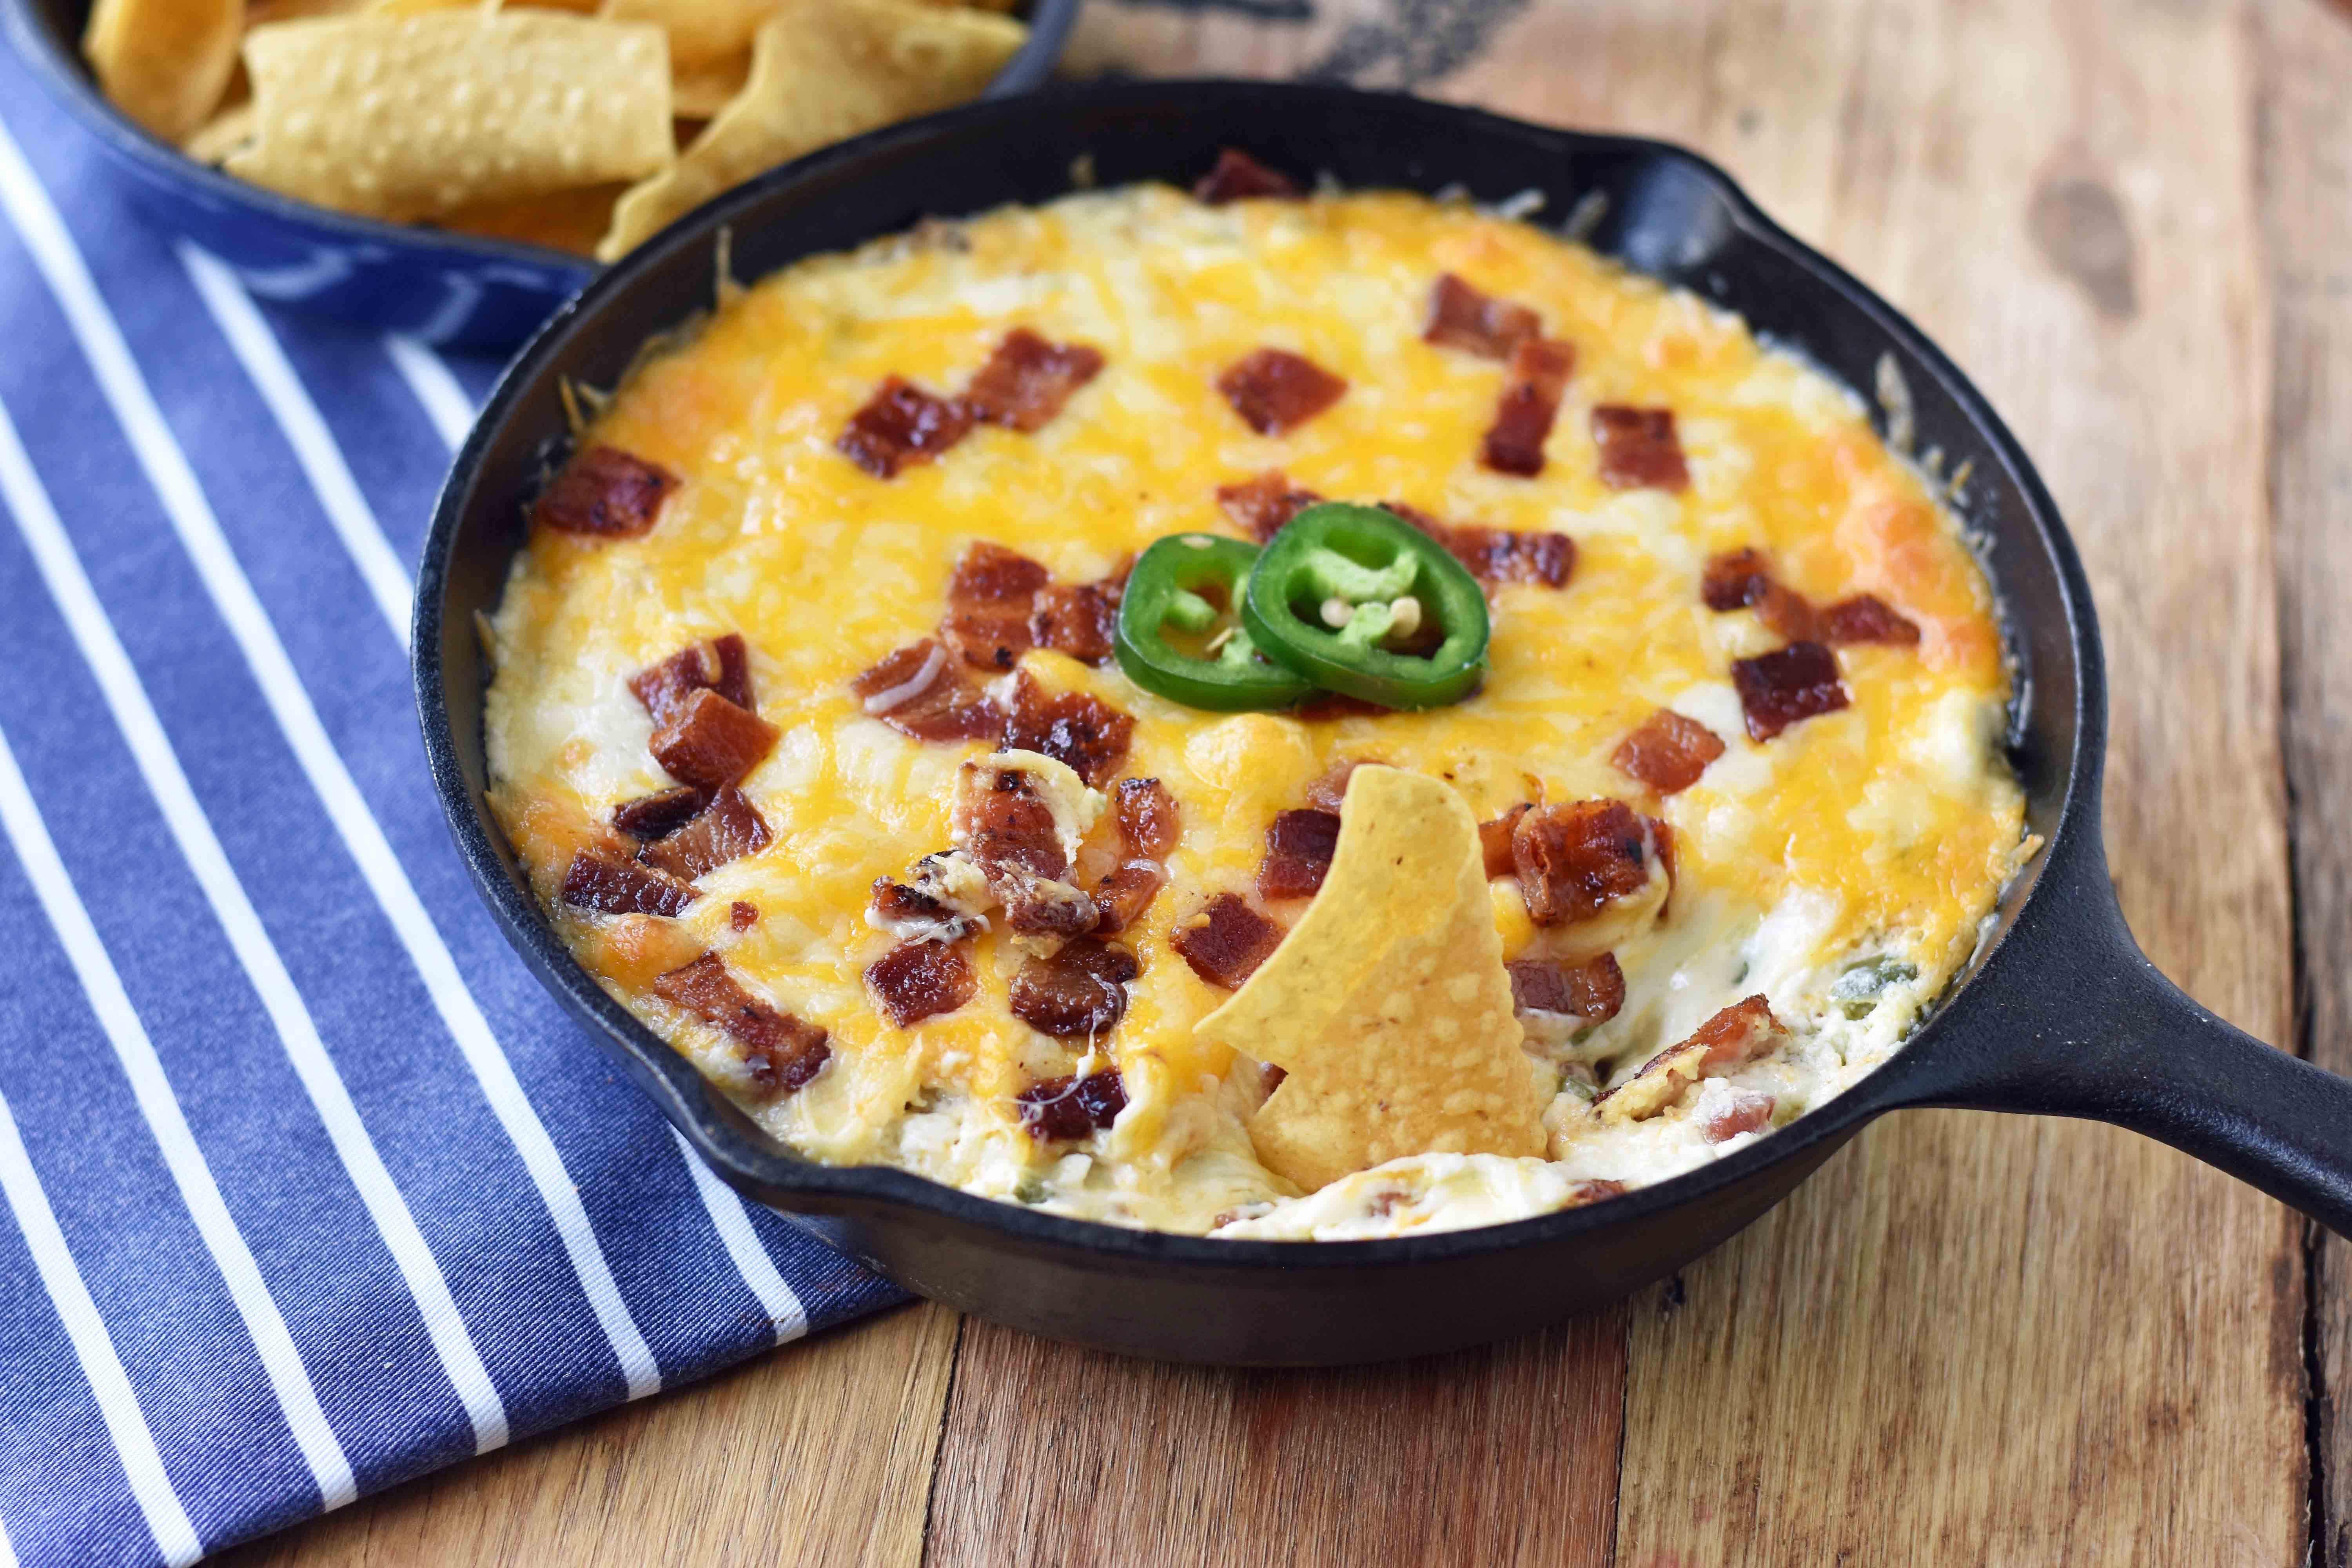 Creamy Jalapeno Popper Dip with Bacon. Homemade Jalapeno Popper Dip made with cream cheese, sour cream, mayo, fresh jalapenos, two kinds of Mexican cheeses, and crispy bacon. The perfect party appetizer. This Jalapeno Popper Dip is so popular! www.modernhoney.com